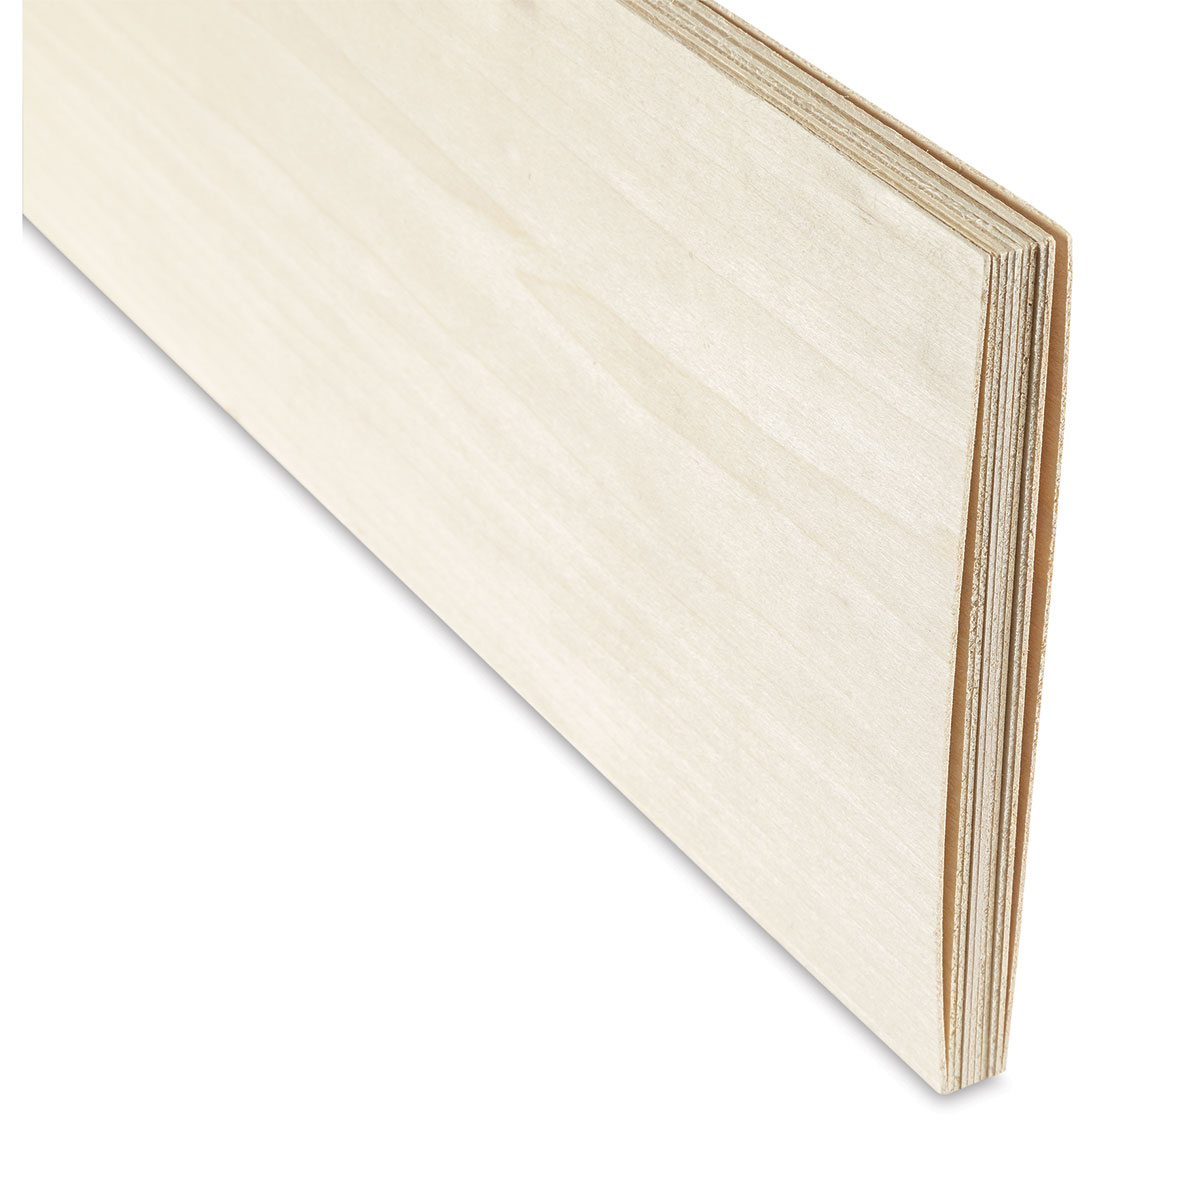 Midwest Products Genuine Basswood Sheets - 1/16 x 6 x 24, 10 Pieces